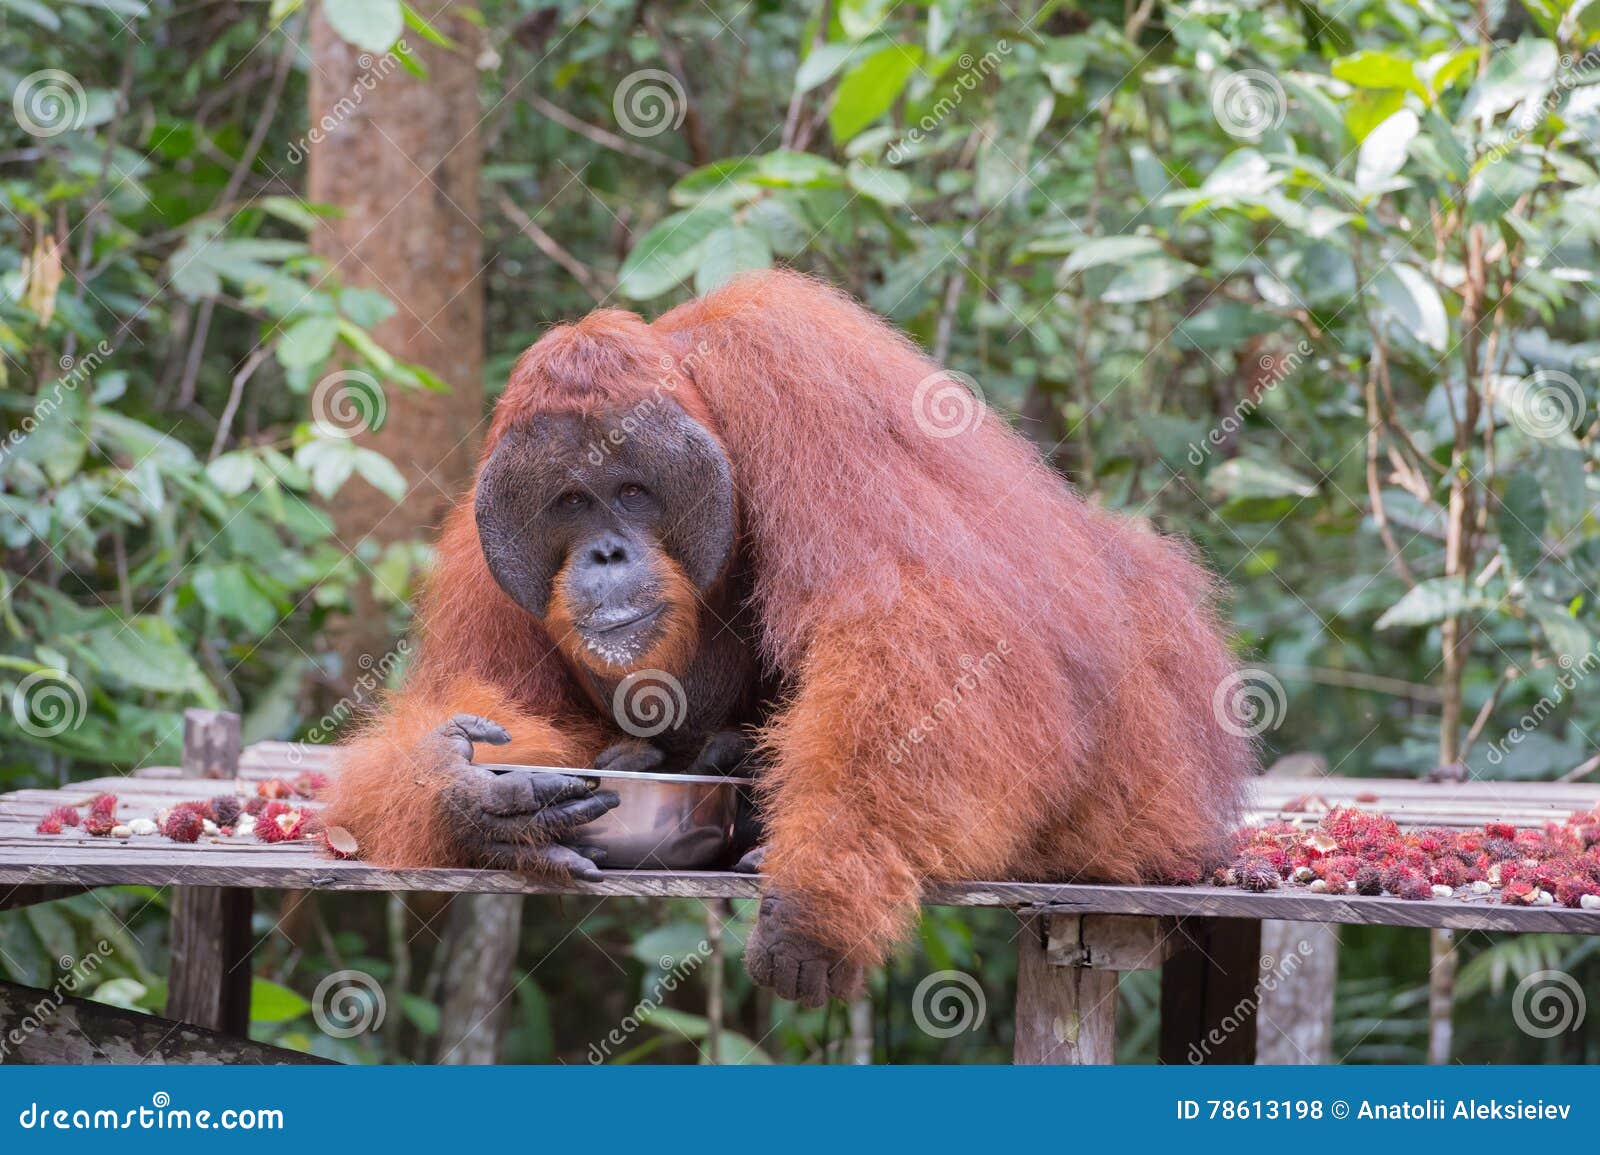 Huge Red Orangutan  Drinking From A Metal Bowl On A 